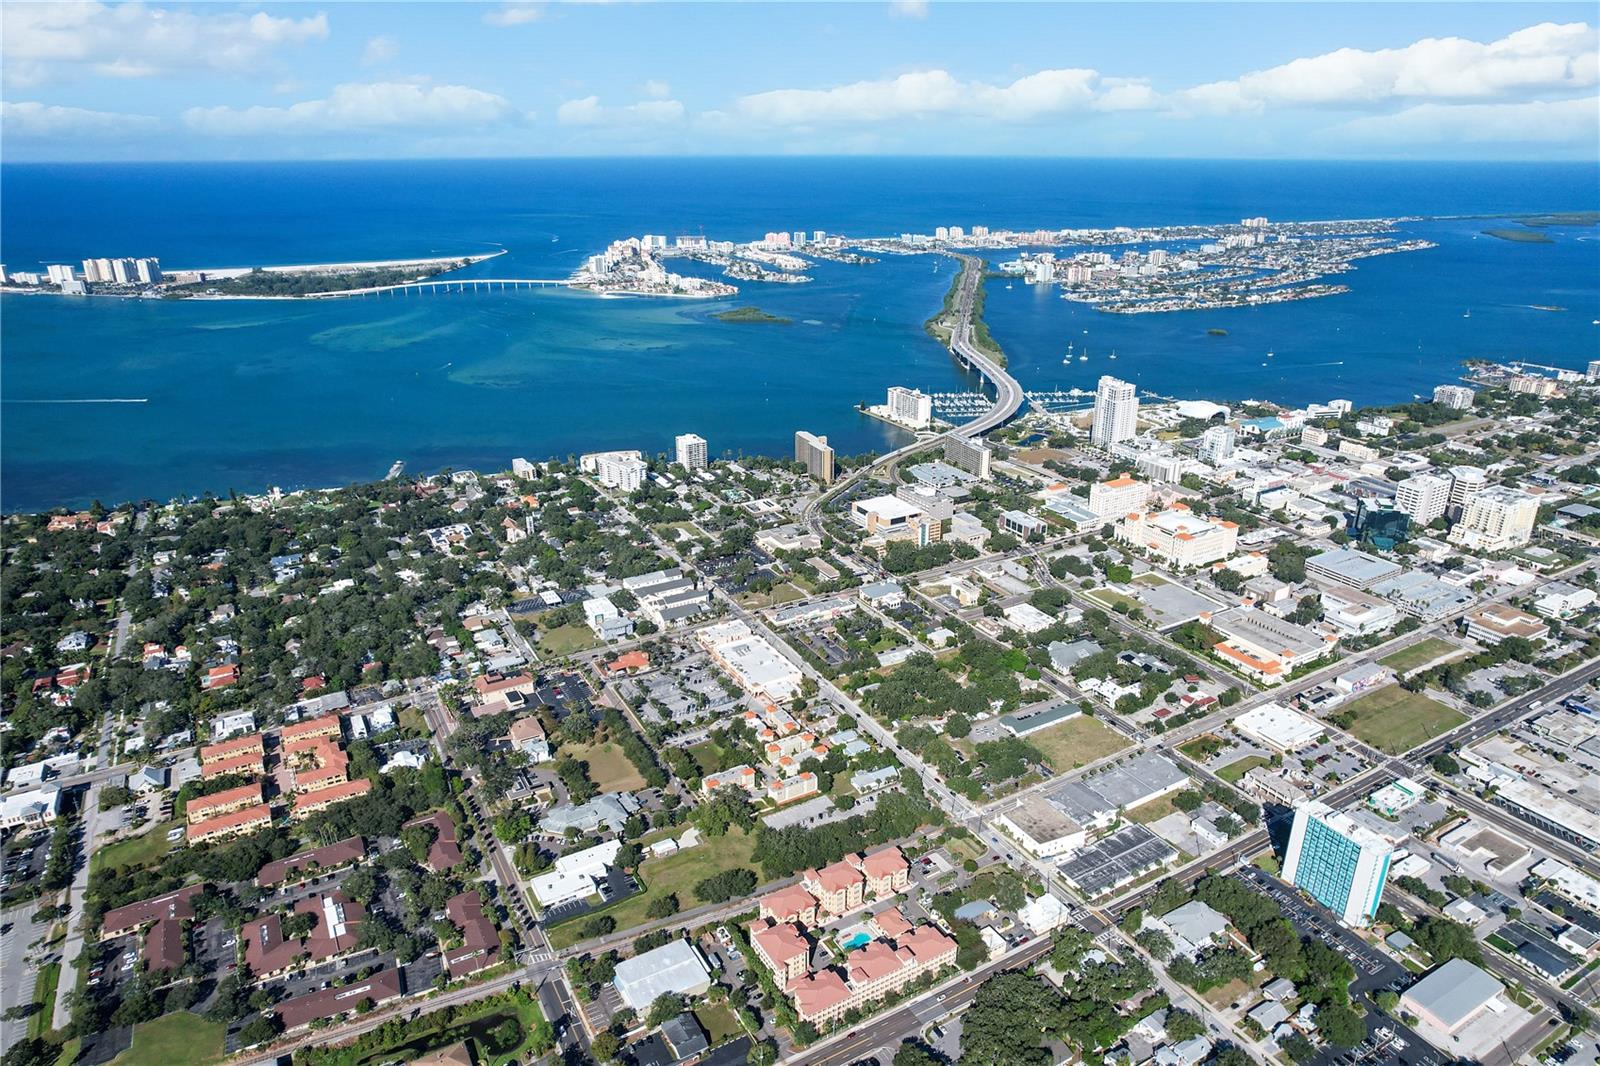 Ariel view of Memorial Causeway leading to Clearwater Beach.